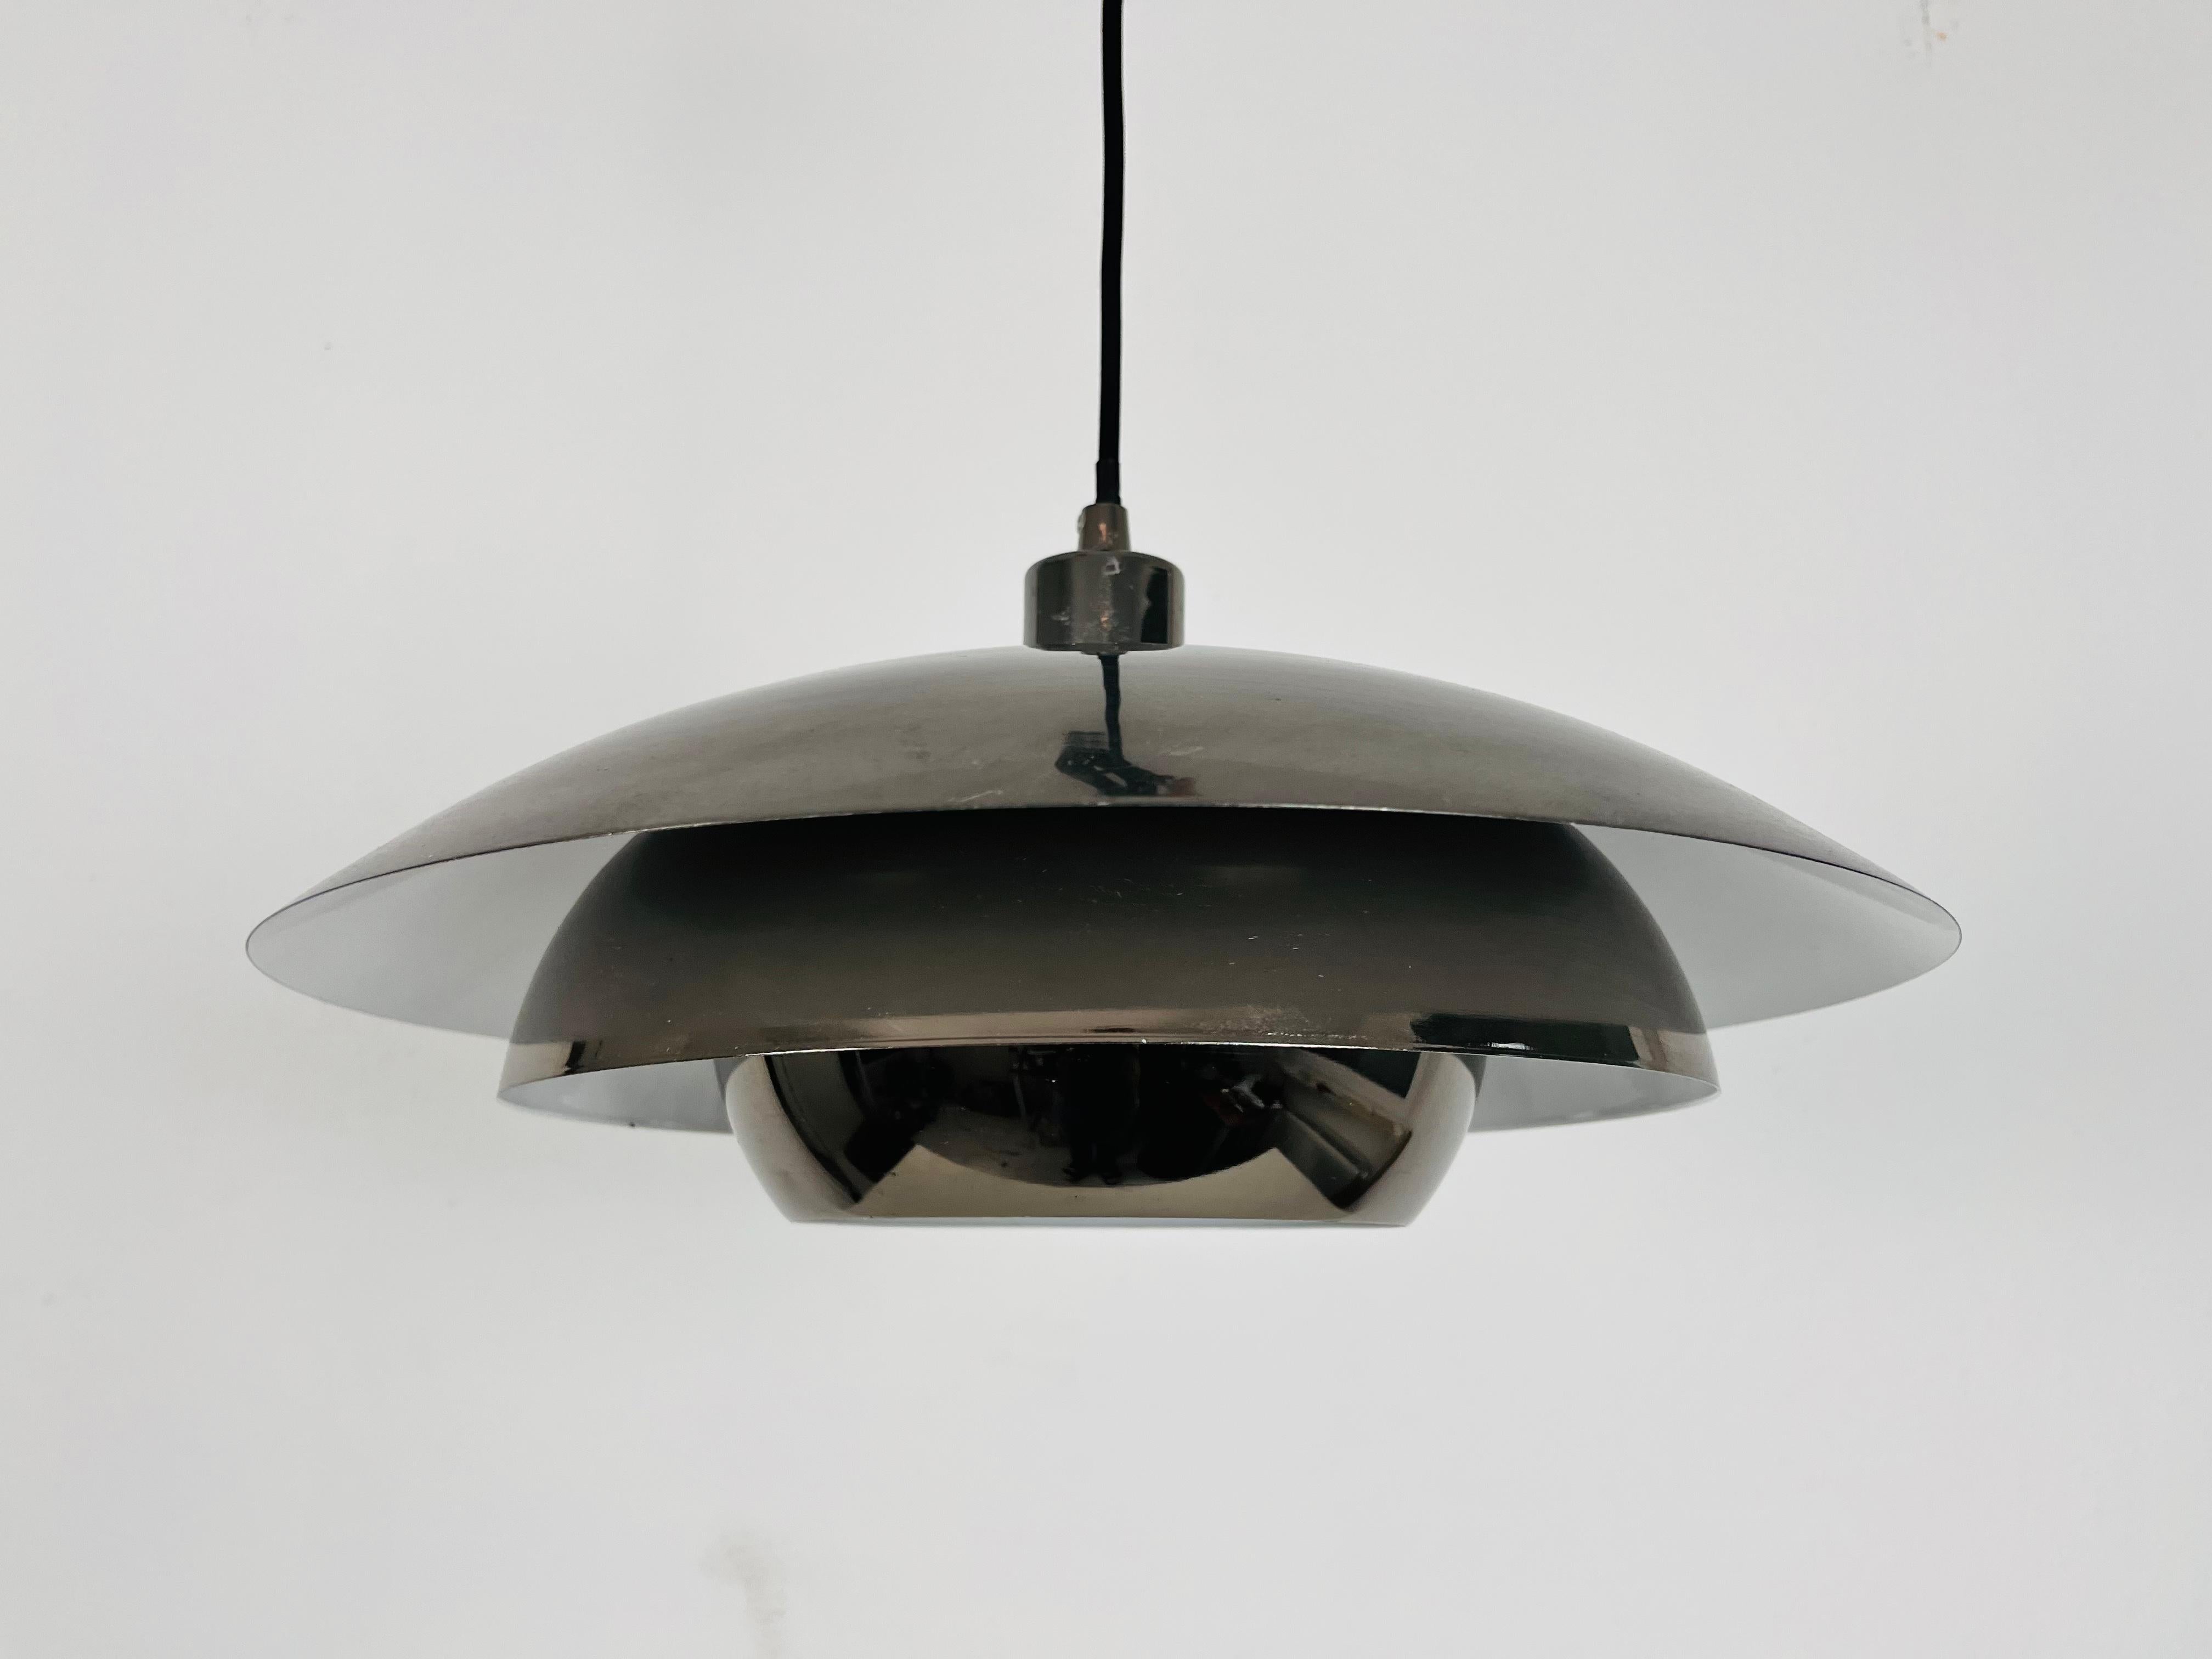 Danish chrome metal pendant lamp made in the 1980s.. The fixture gives a very beautiful light. It is made from thin aluminum.

Measurements:
Height: 20-100cm
Diameter: 40 cm

The light requires one E27 light bulb. Works with both 110/220V.